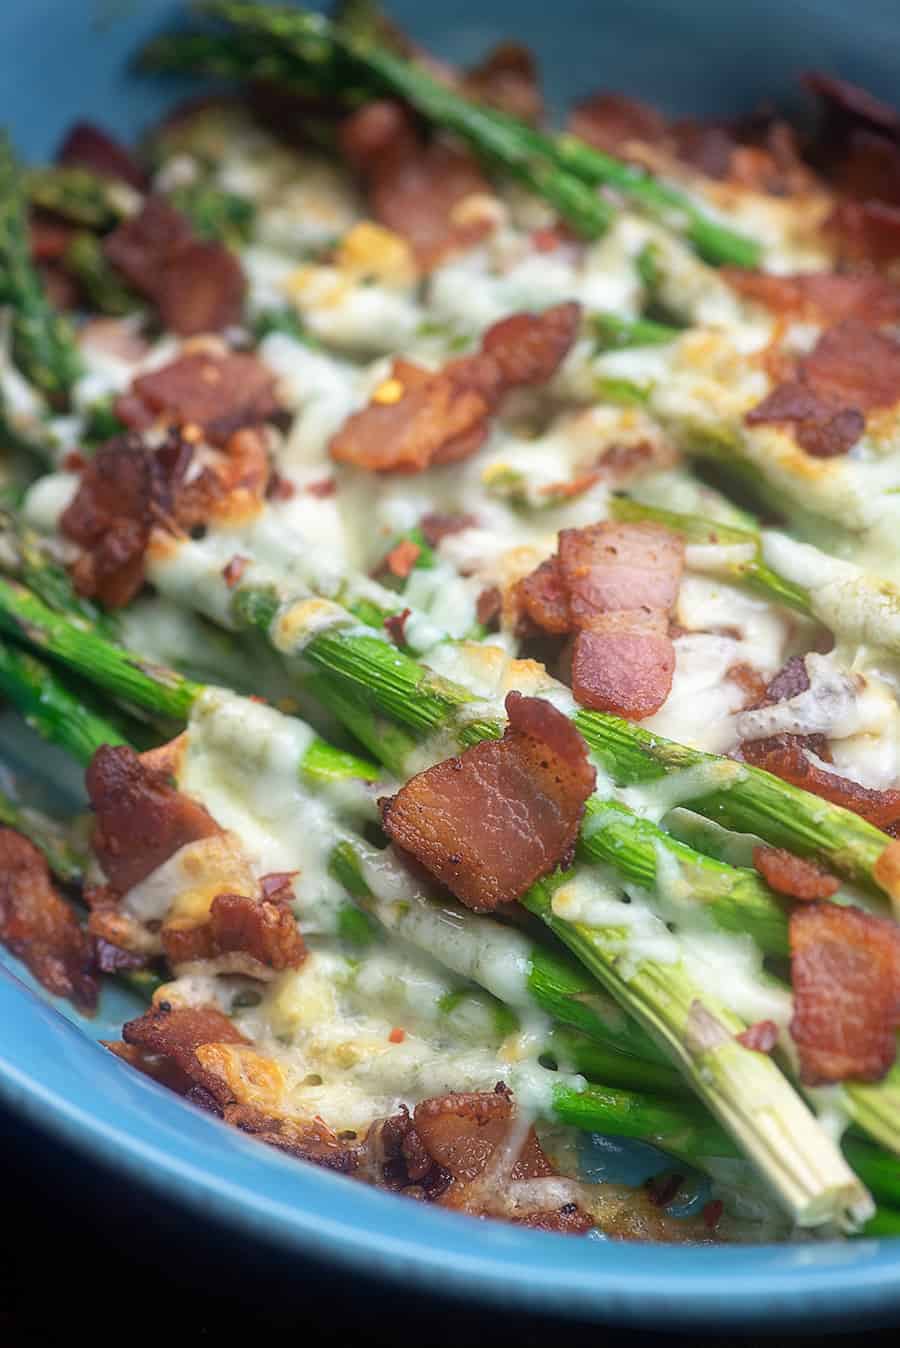 asparagus topped with cheese and bacon.